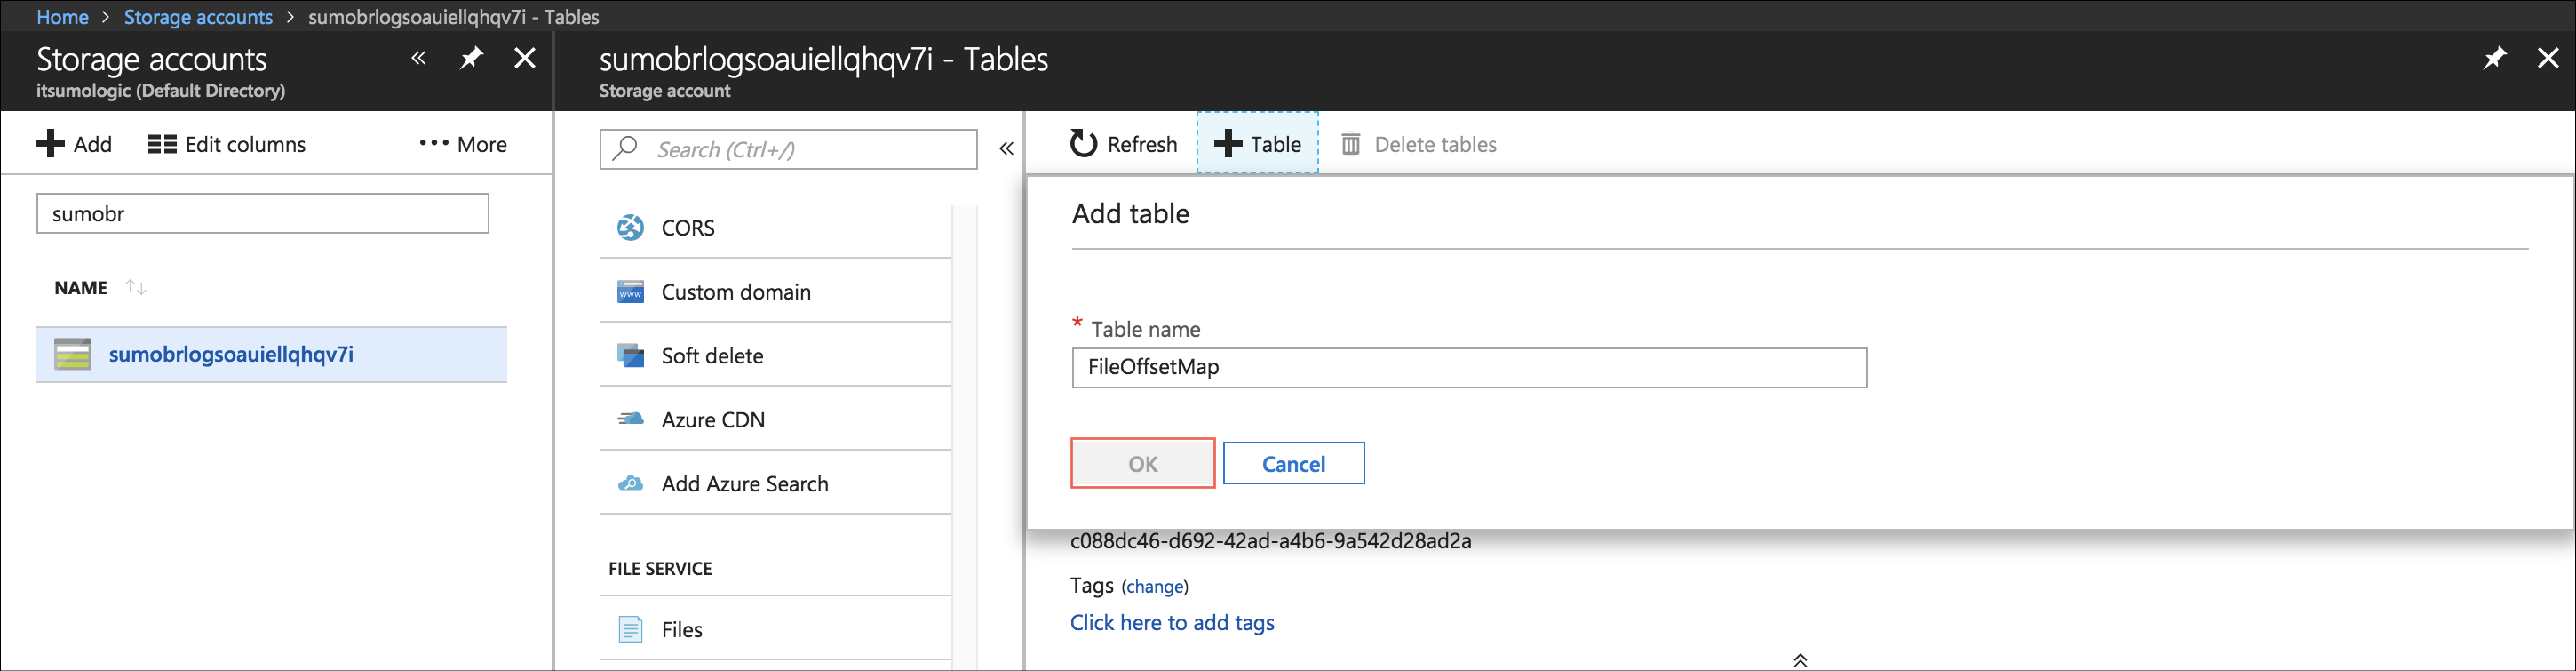 Azure_Blob_create-table.png